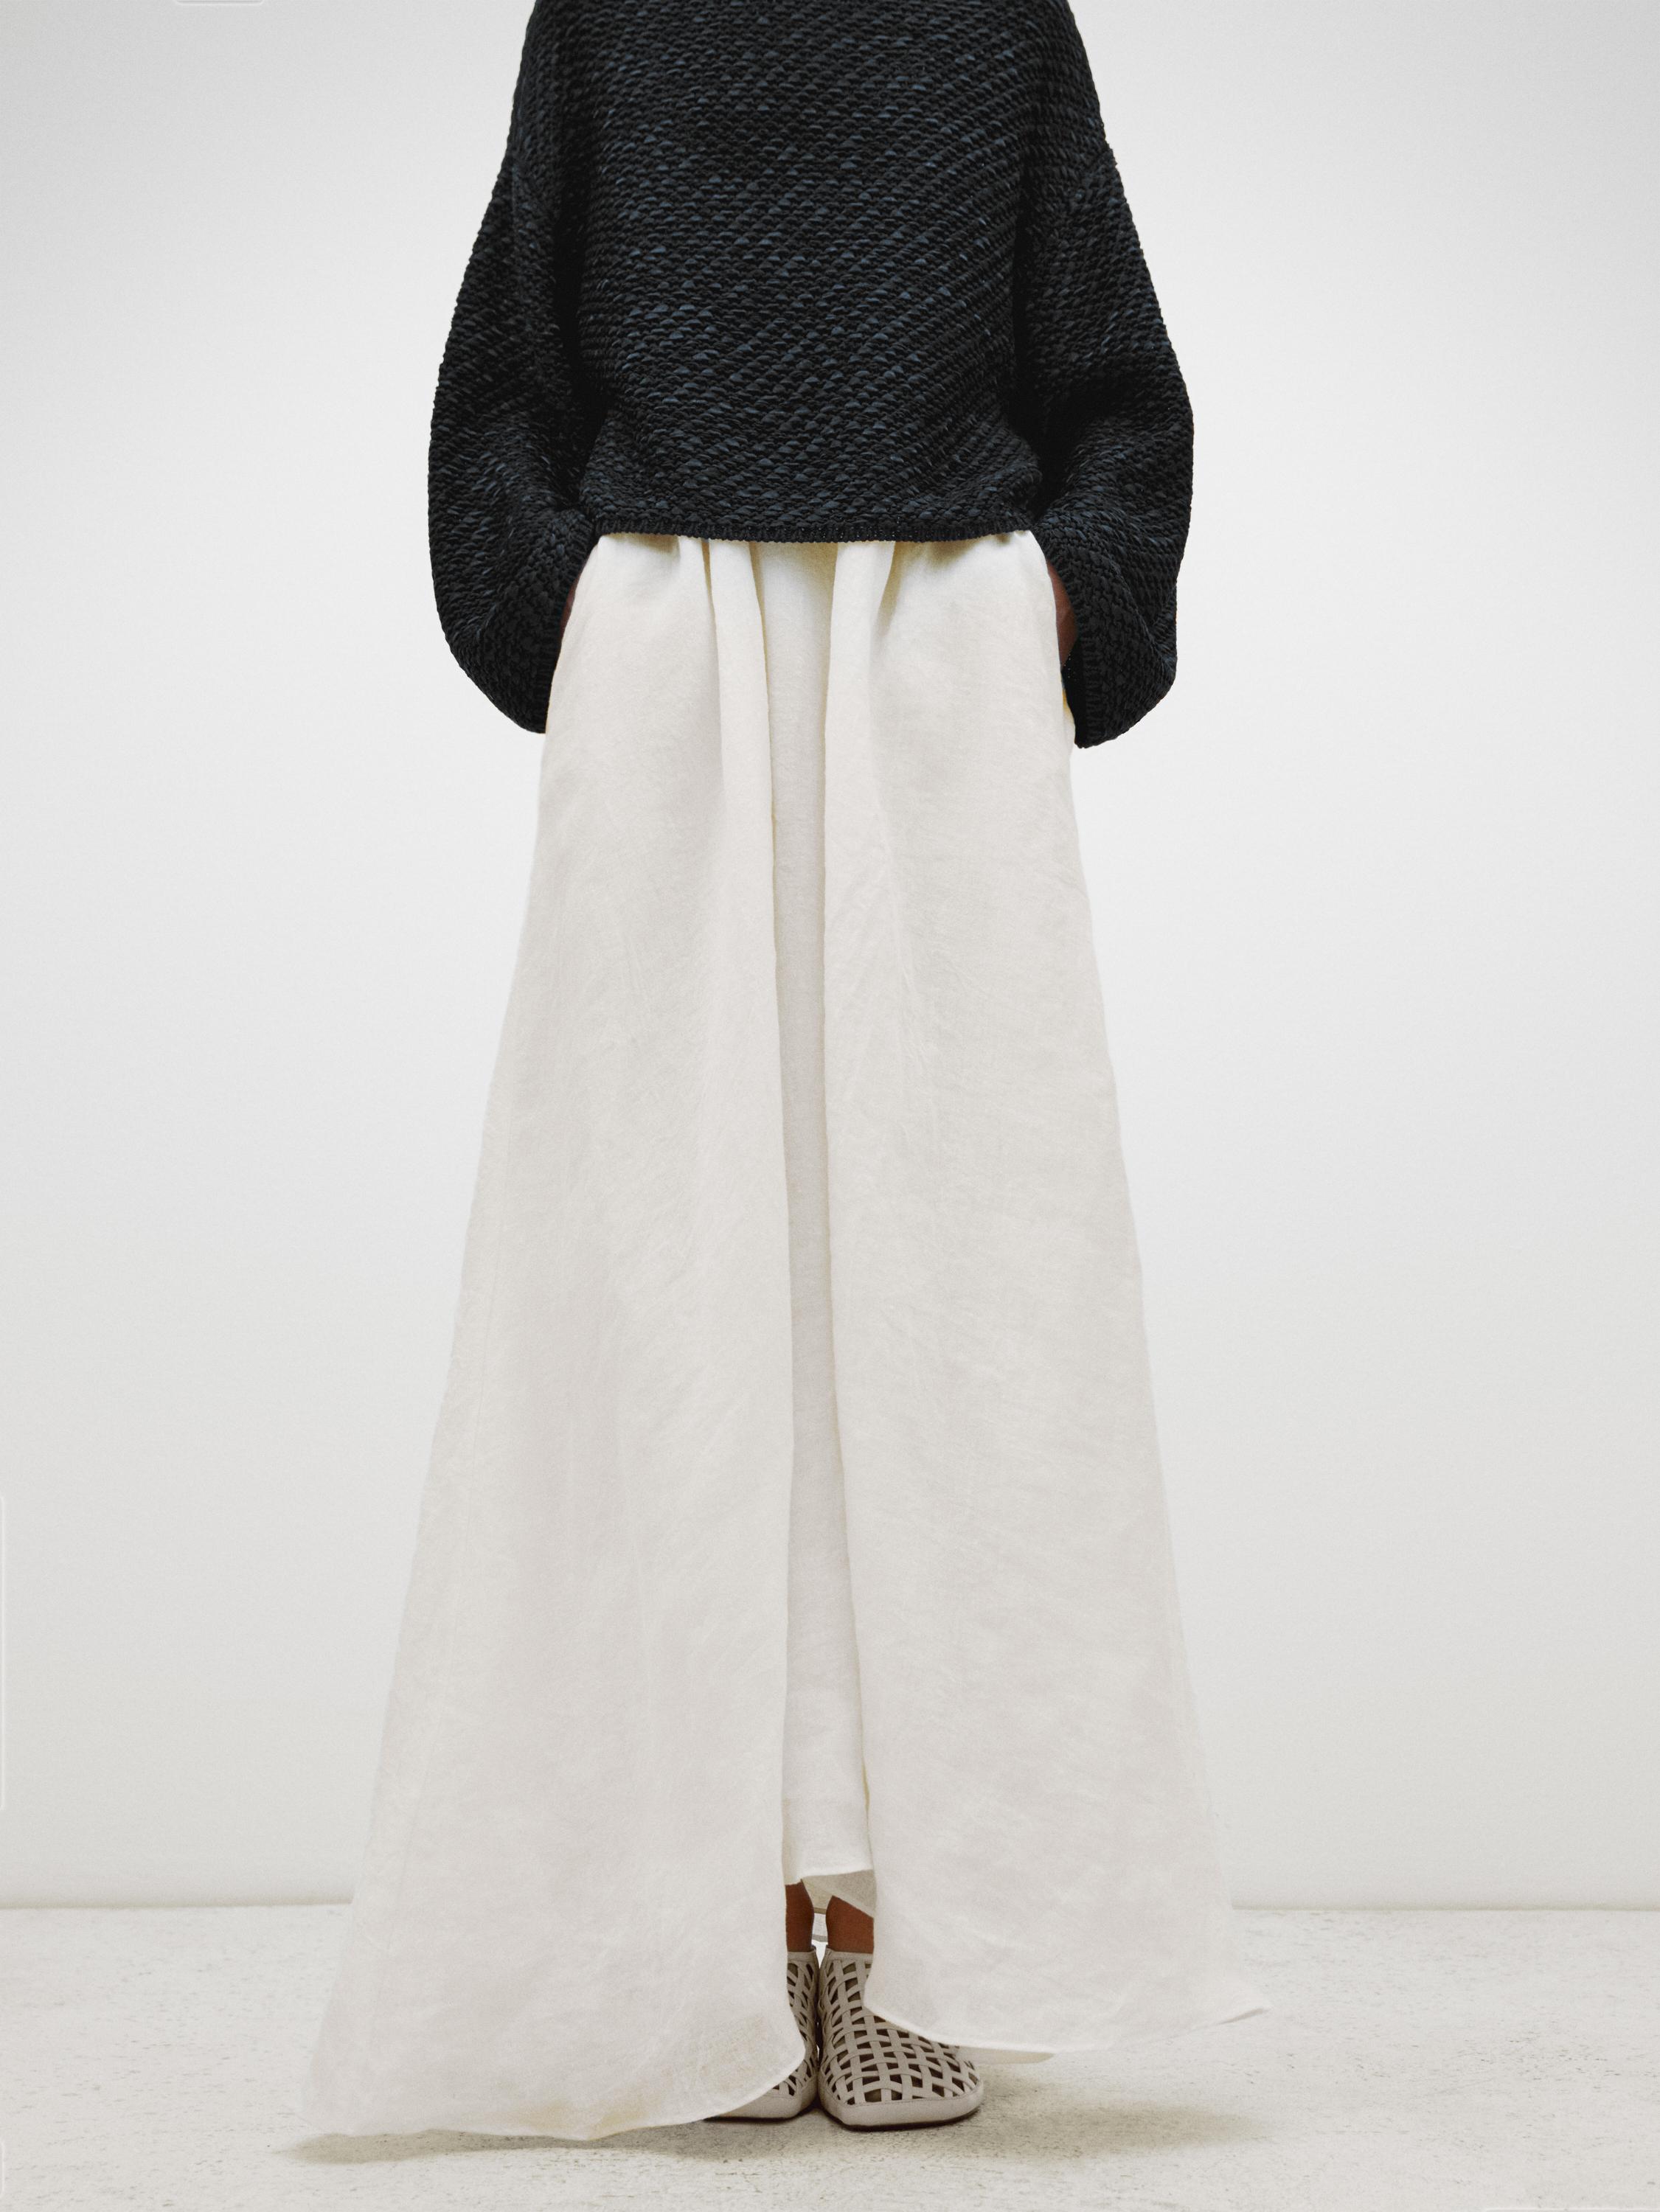 Textured knit sweater with low-cut back - Limited Edition - Black 